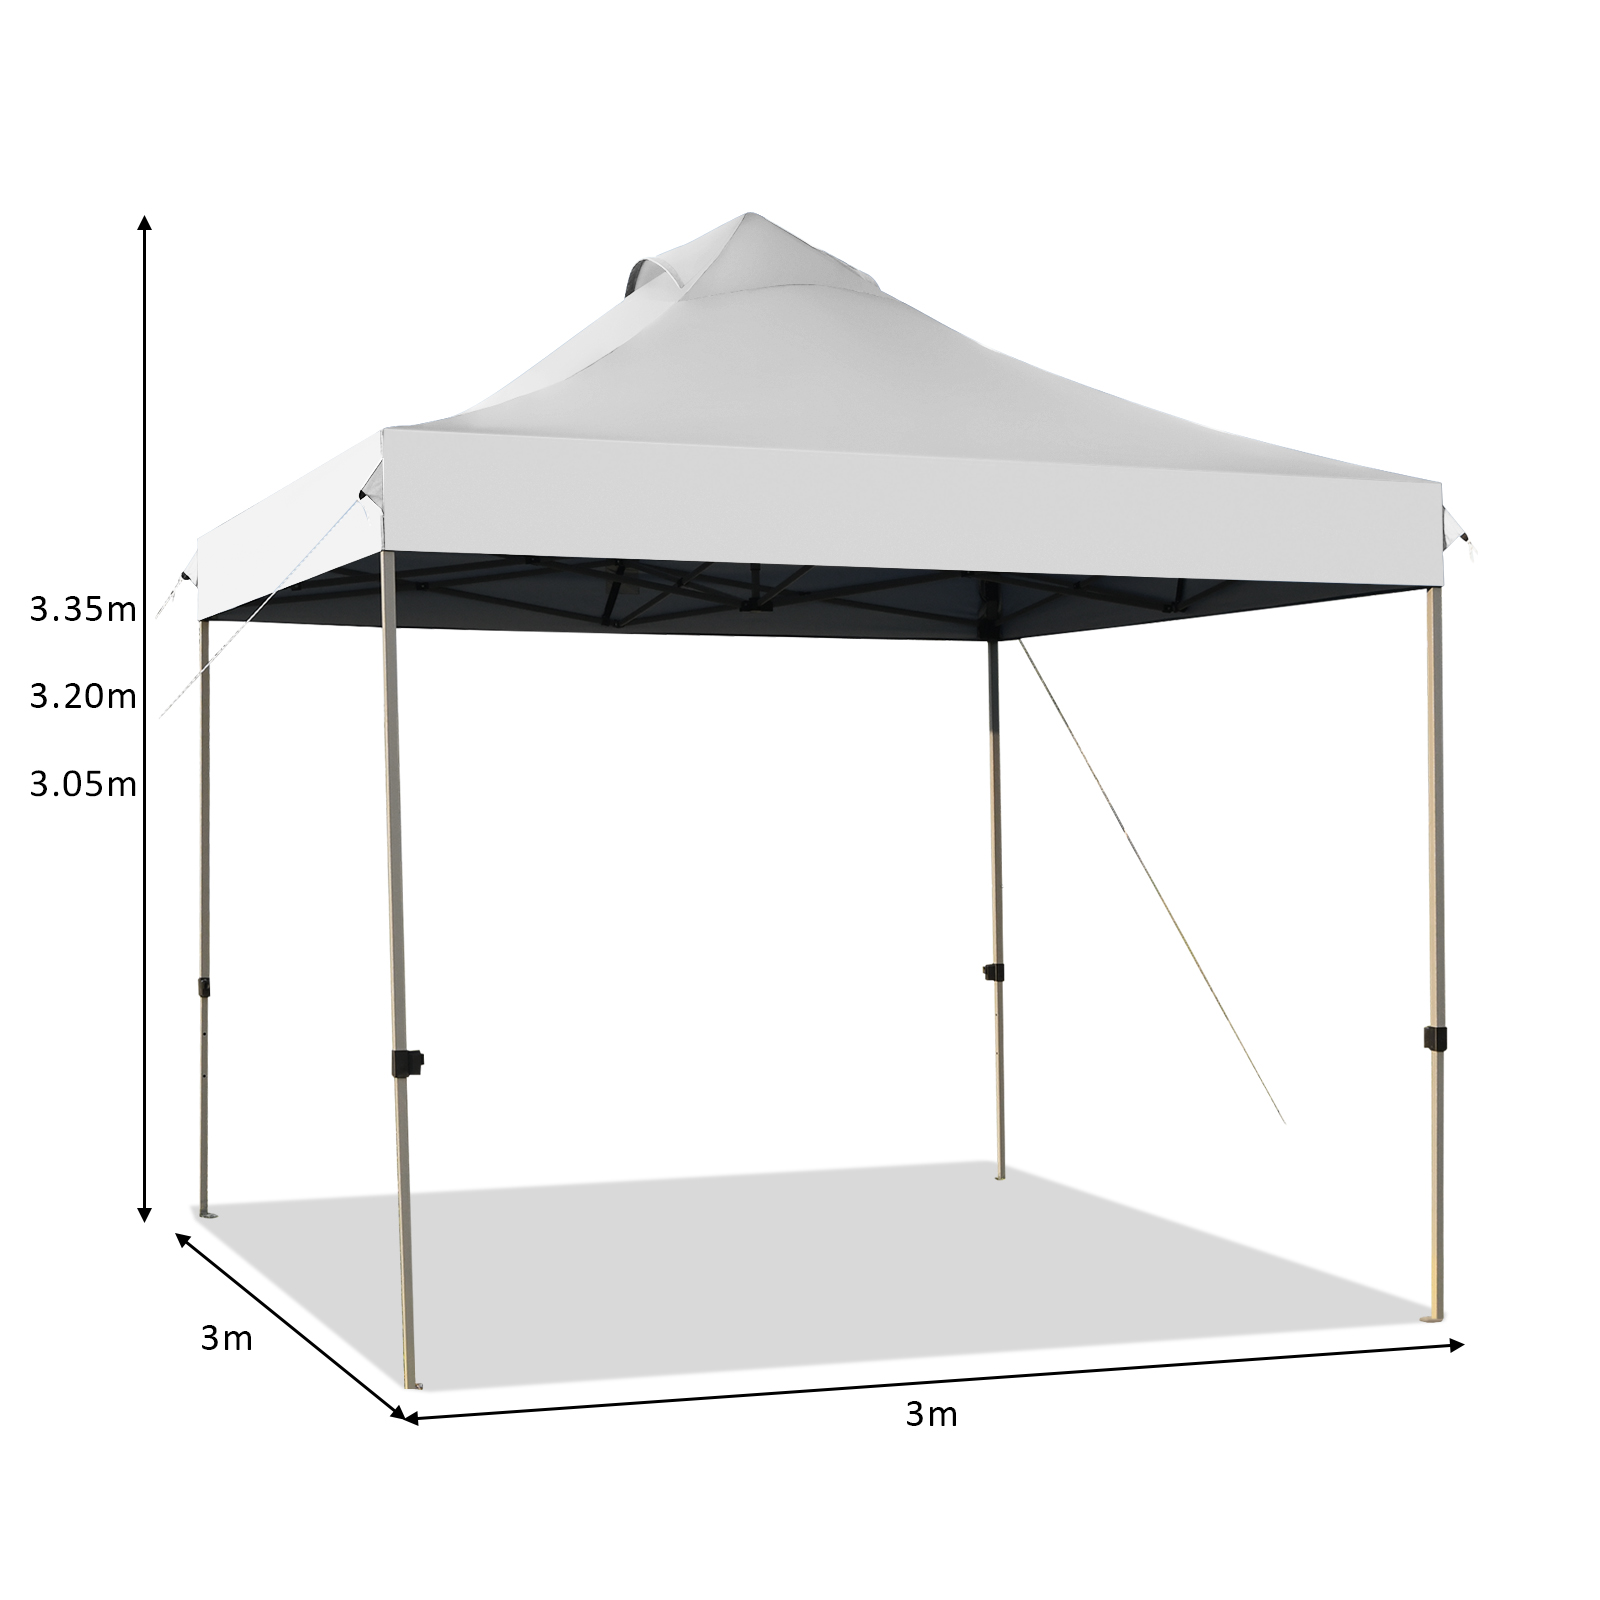 3m_x_3m_Pop_Up_Canopy_Tent_Commercial_Instant_Shelter_White-5.jpg